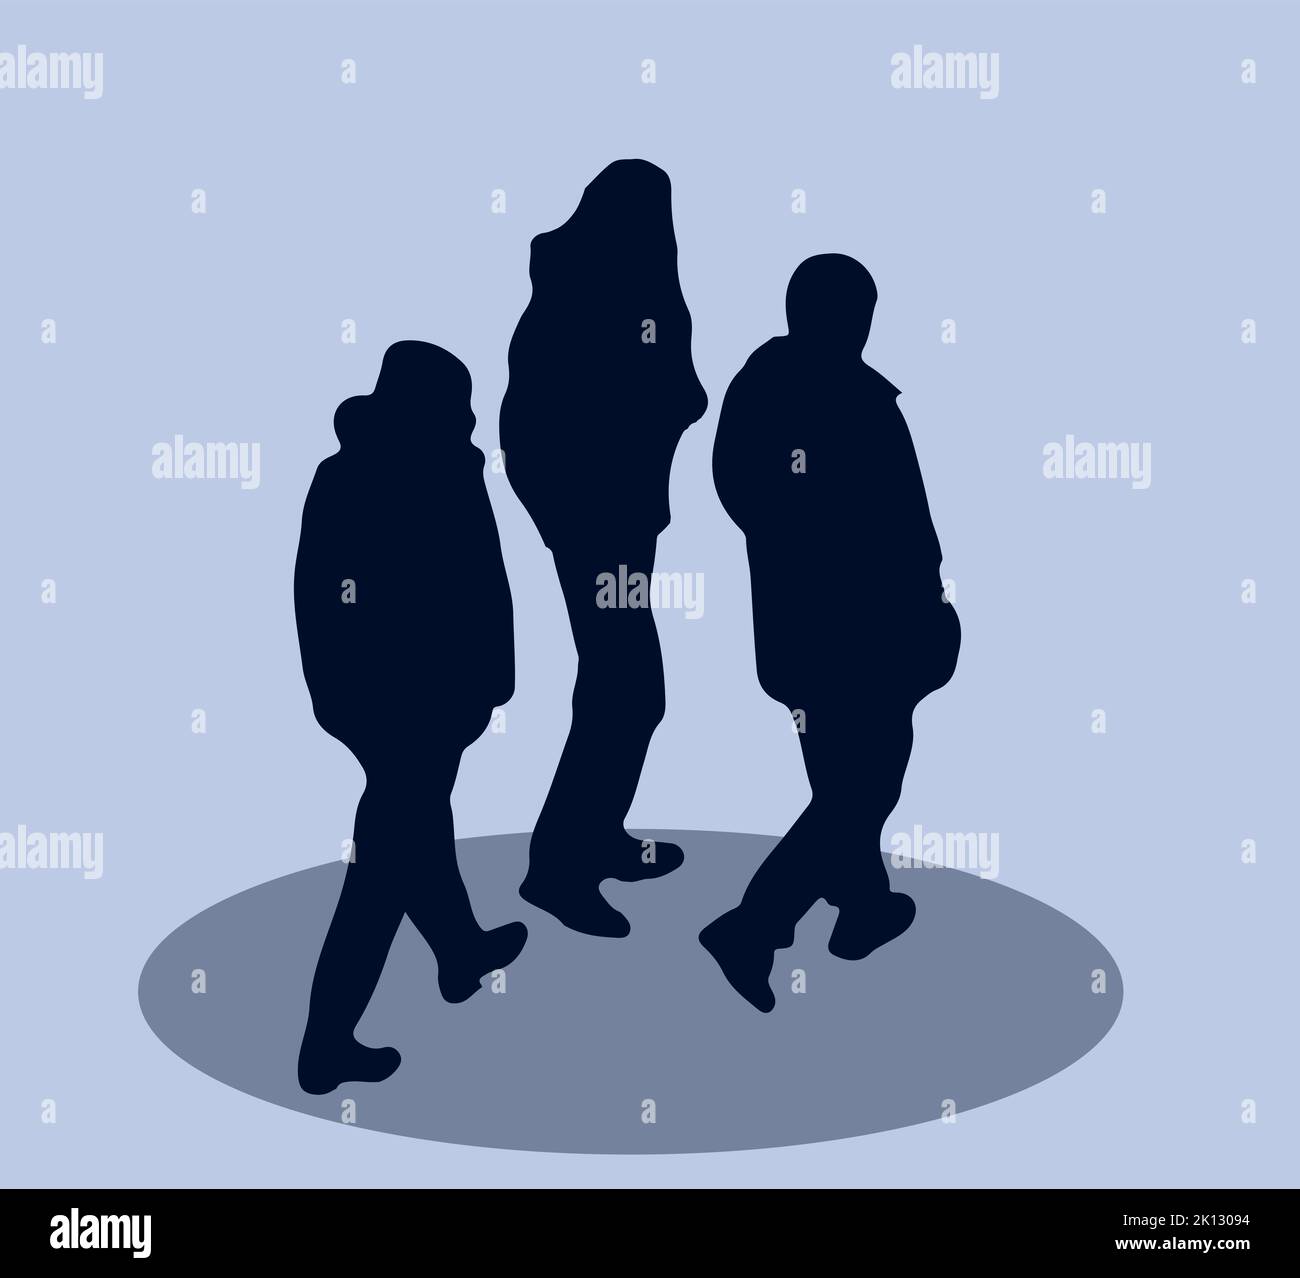 men group on a winter night street, silhouettes Stock Vector